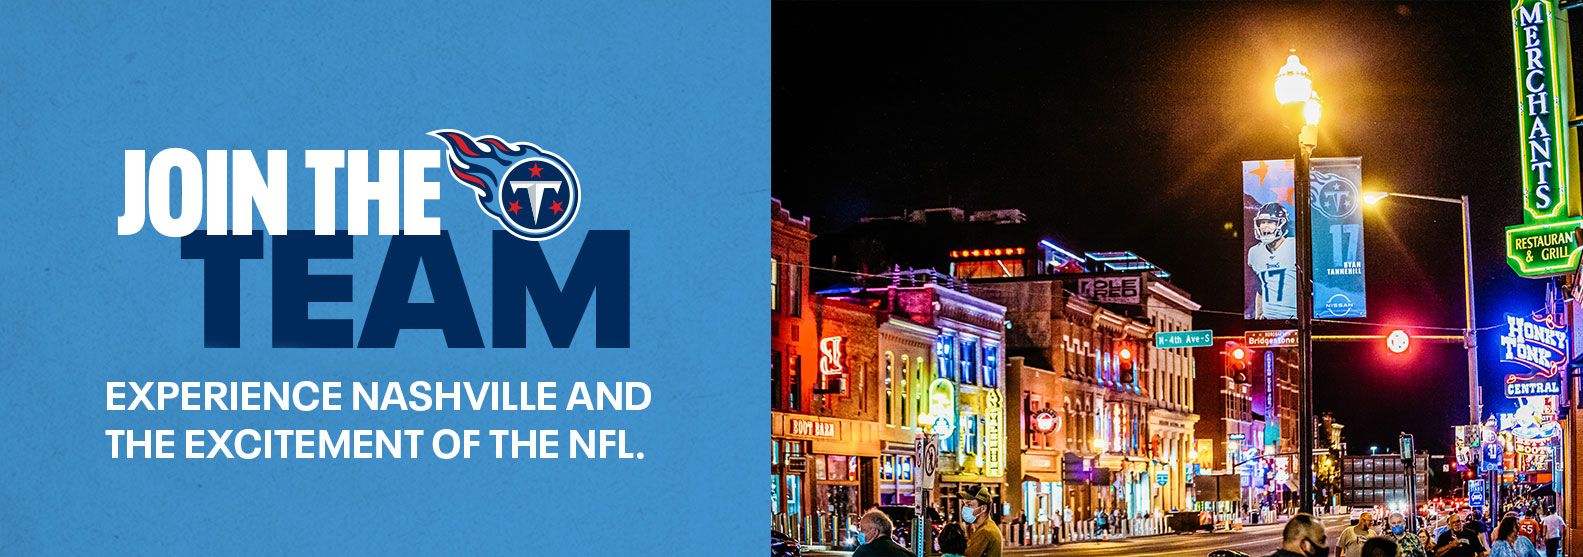 tennessee titans box office